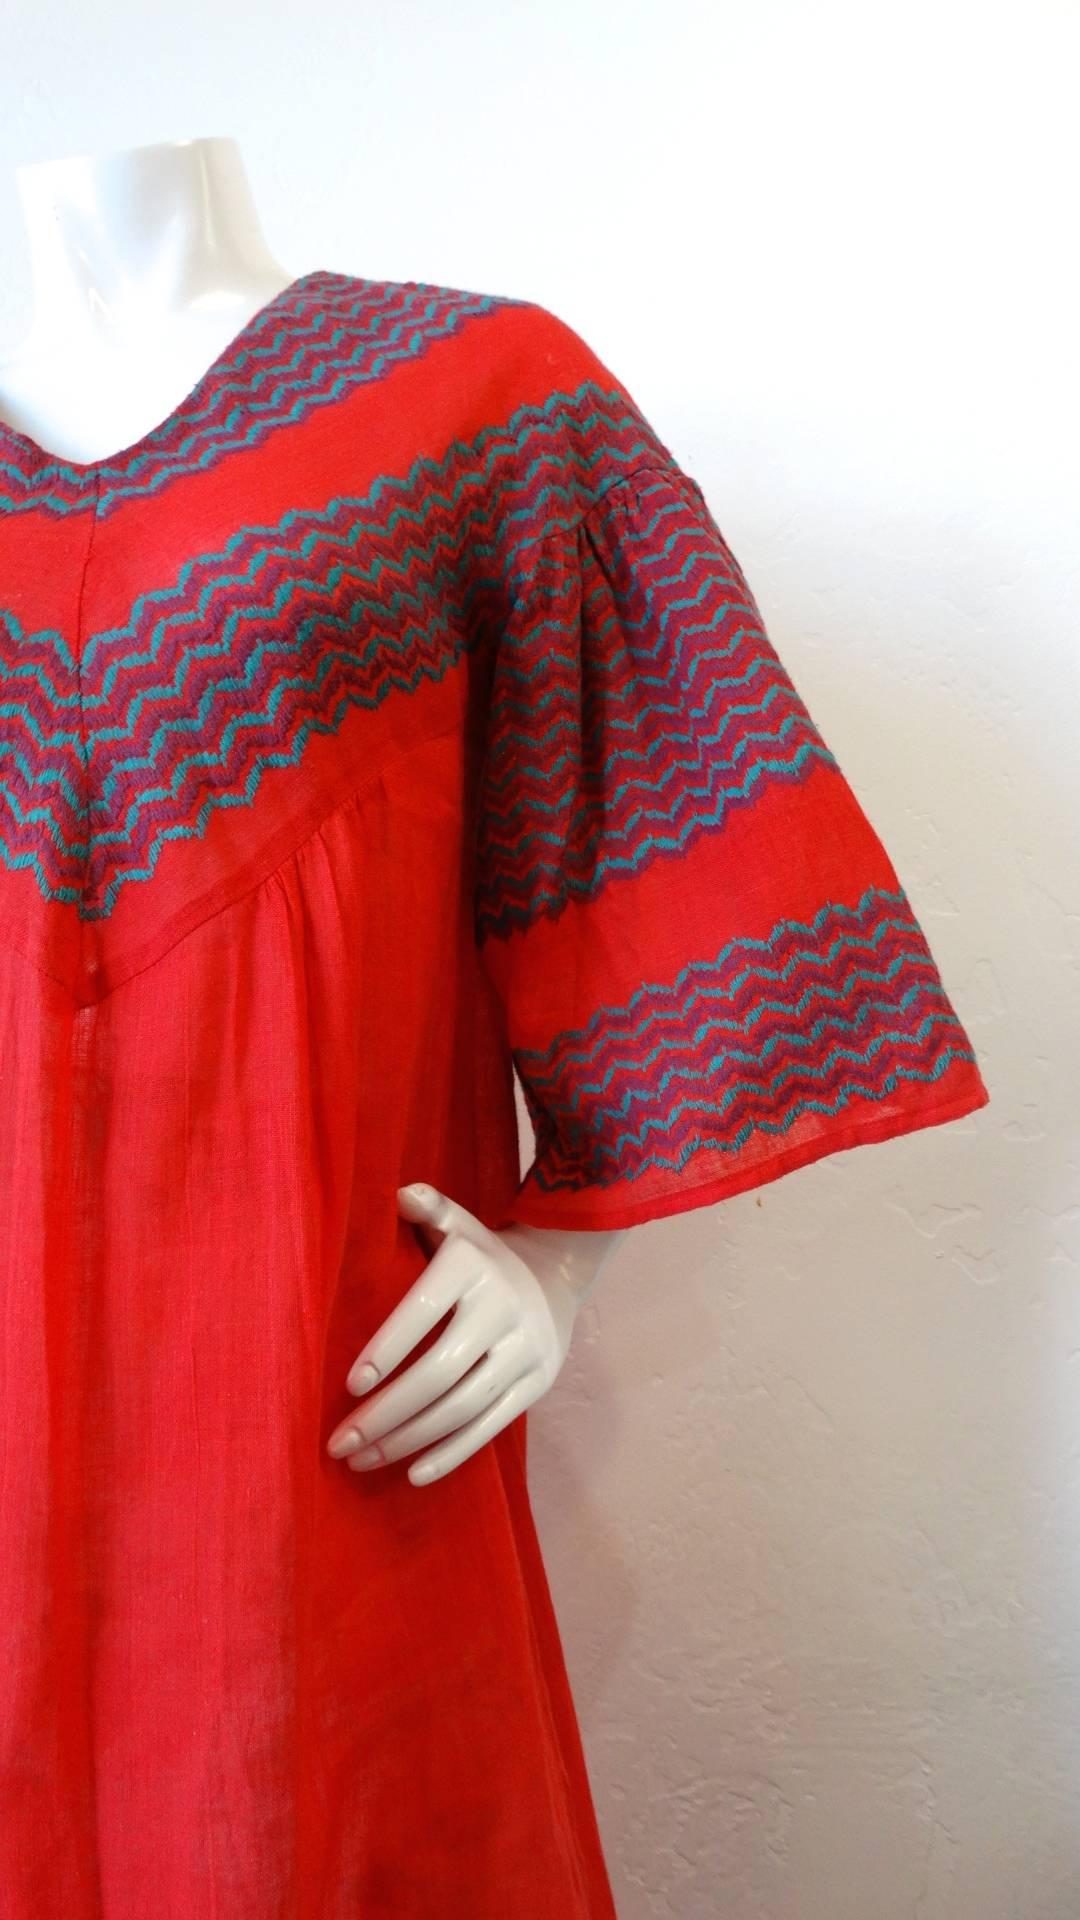 Incredible 1970s red chevron bell sleeve dress from Israeli designer Rikma! Made of Rikma's signature quality woven cotton in bright red. Semi sheer fabric accented by chevron stripes up the bust and sleeves. Maxi style length with flared, bell